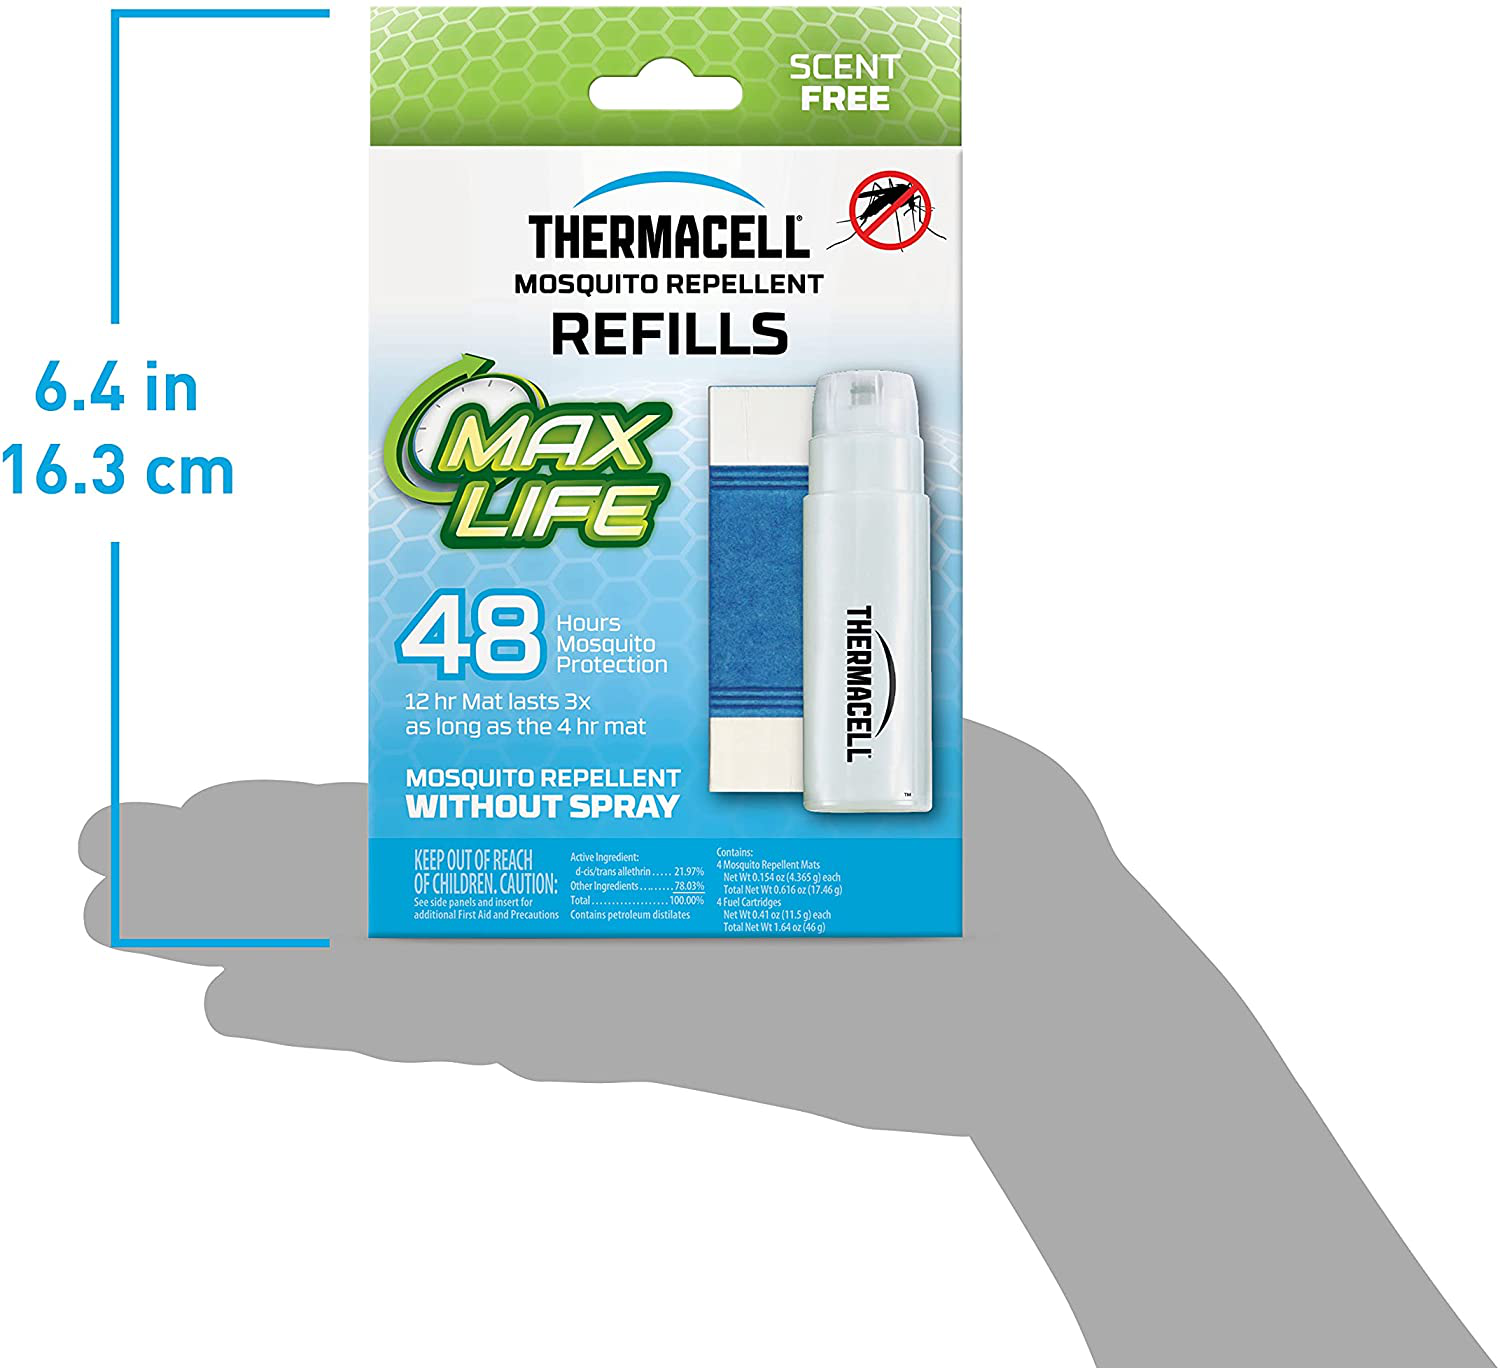 Thermacell Max Life Mosquito Repellent 48-Hour Refill; Includes 4 Fuel Cartridges & 4 Long Lasting Mats; Compatible With All Fuel-Powered Thermacell Repellers; No Mess, No Smell, DEET-Free